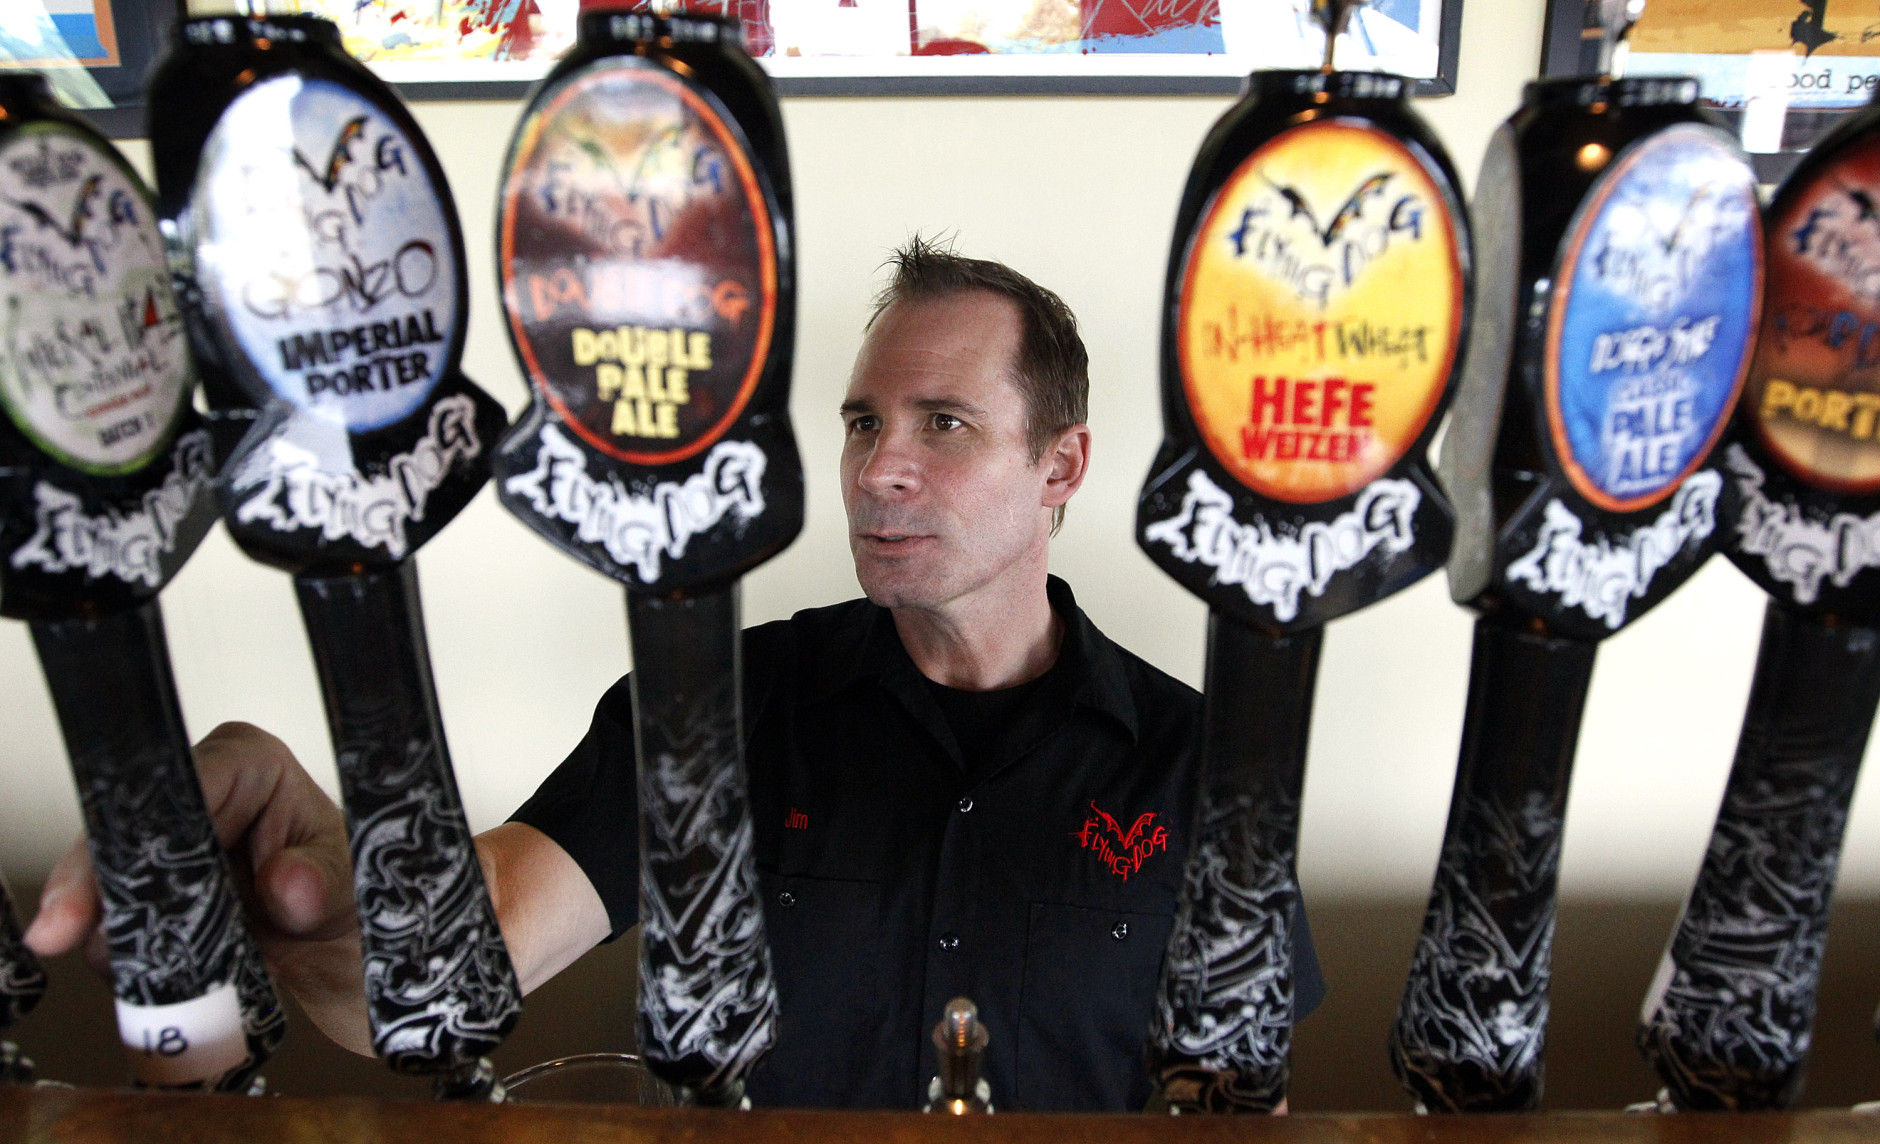 In this July 25, 2011 photo, Flying Dog Brewery CEO Jim Caruso selects a beer to pour from a tap at the brewery's headquarters in Frederick, Md. (AP Photo/Patrick Semansky)